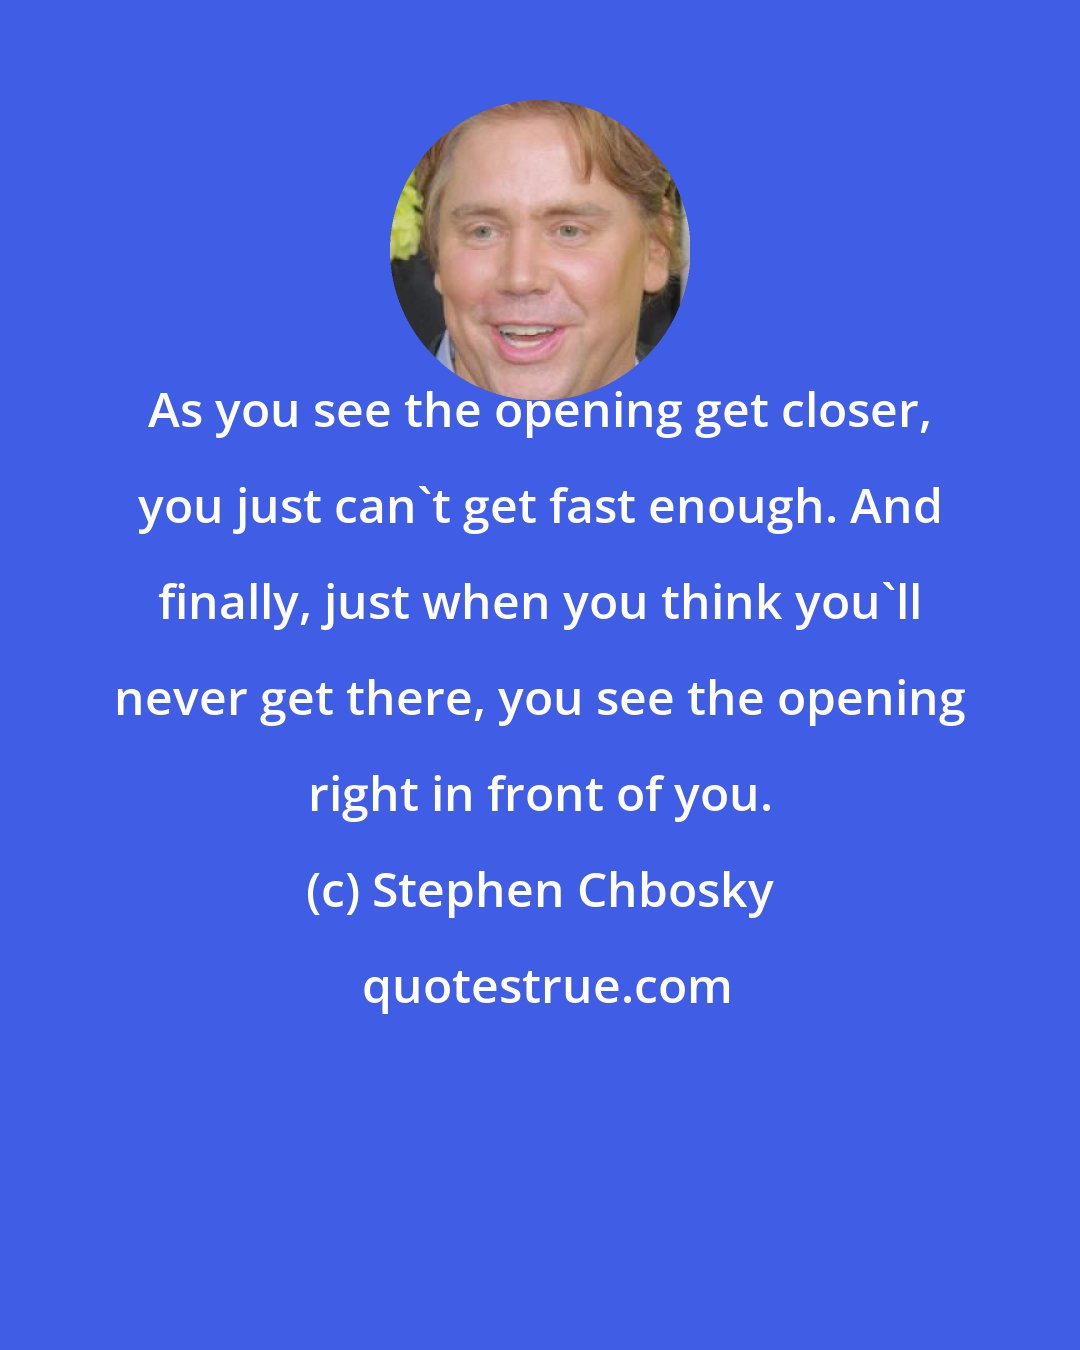 Stephen Chbosky: As you see the opening get closer, you just can't get fast enough. And finally, just when you think you'll never get there, you see the opening right in front of you.